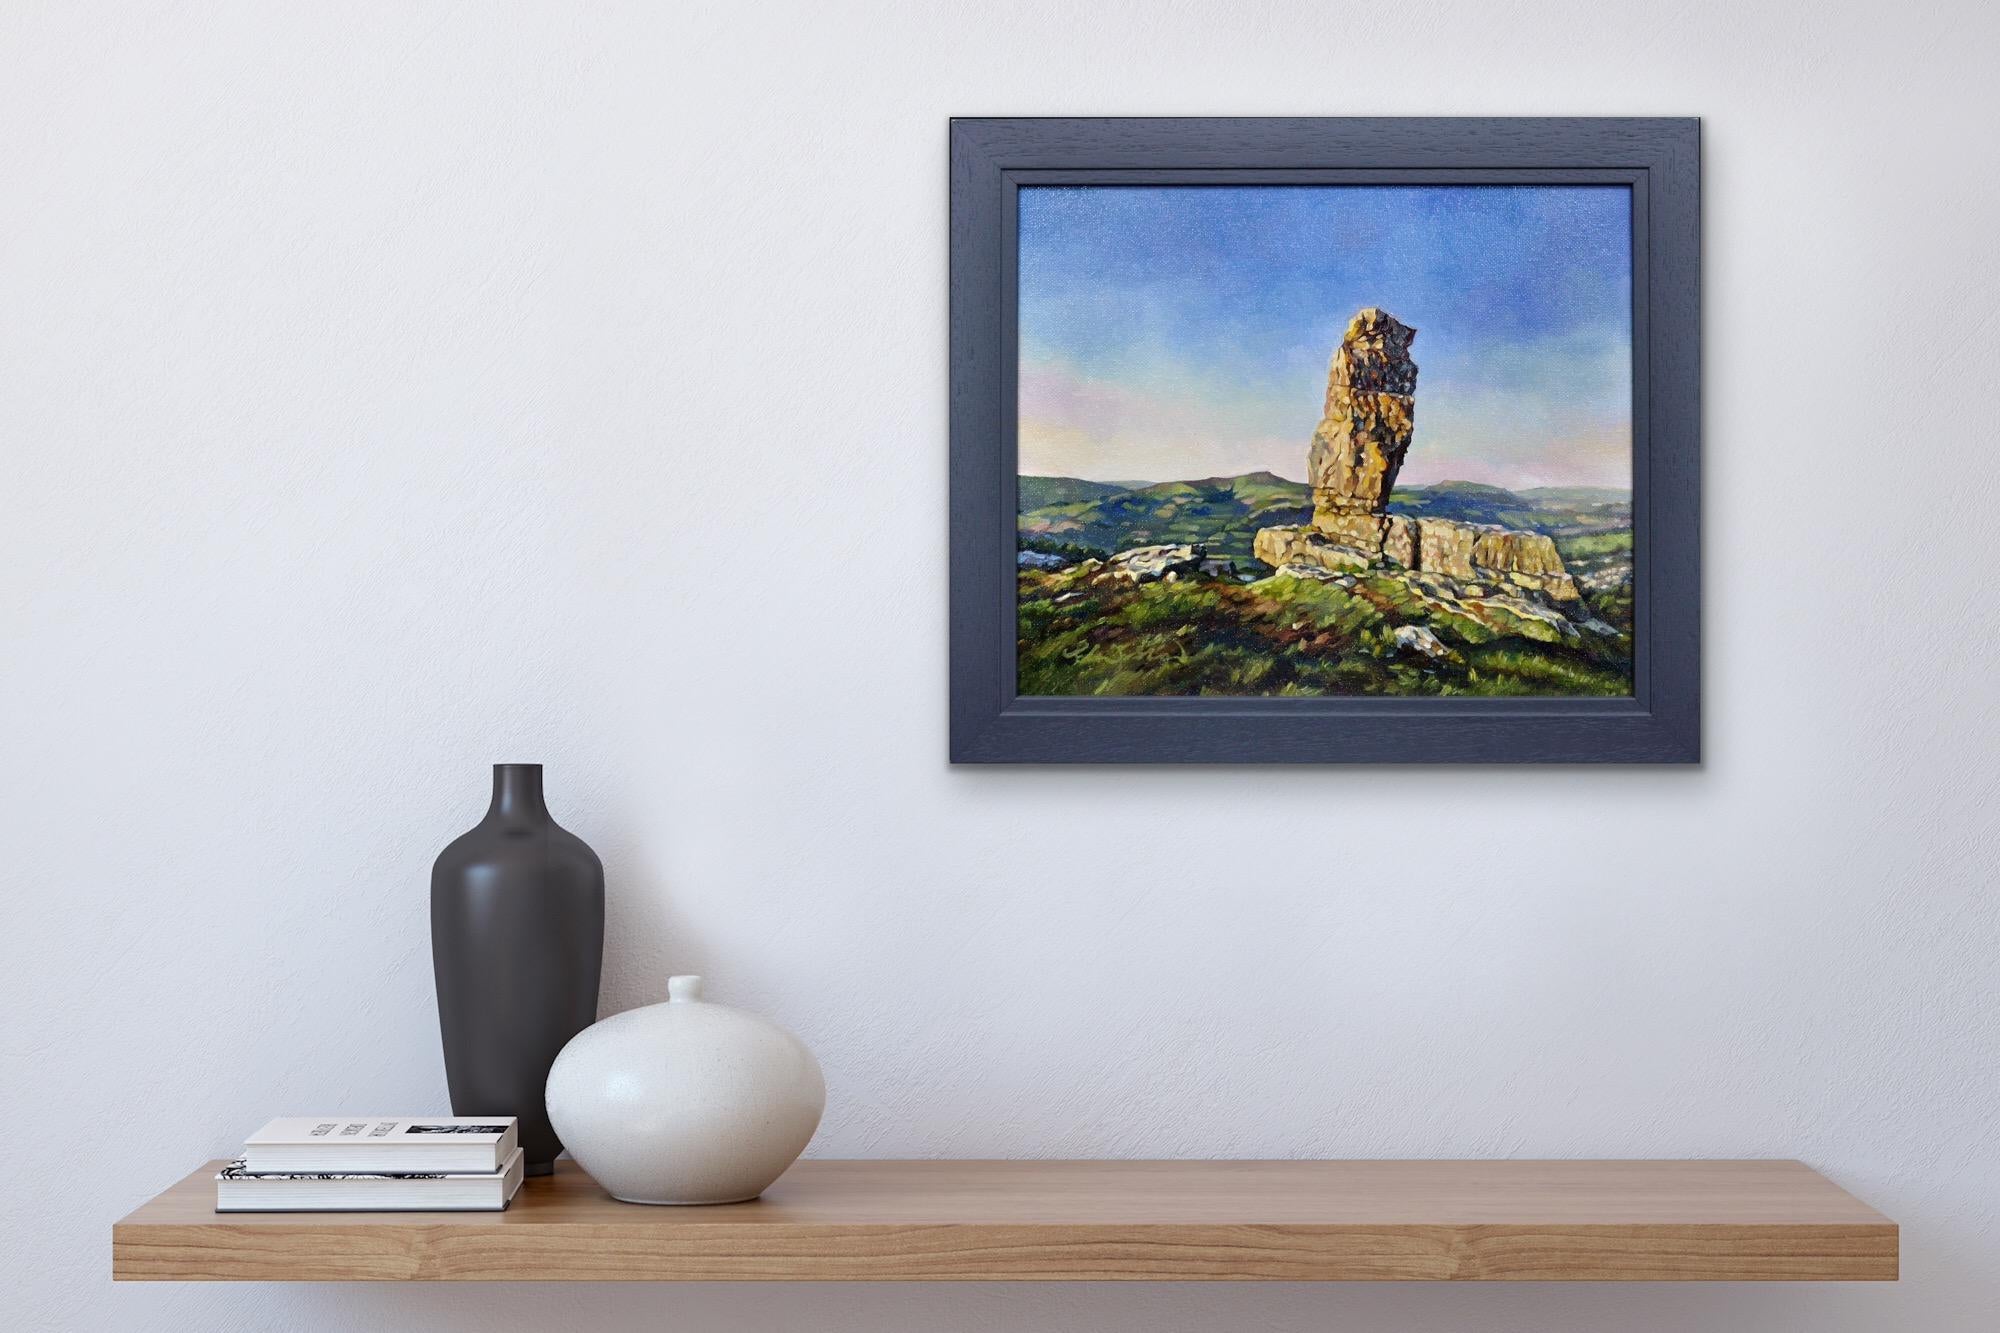 Y Bugail Unig (The Lonely Shepherd), Llangattock, Brecon Beacons. Welsh Folklore For Sale 10